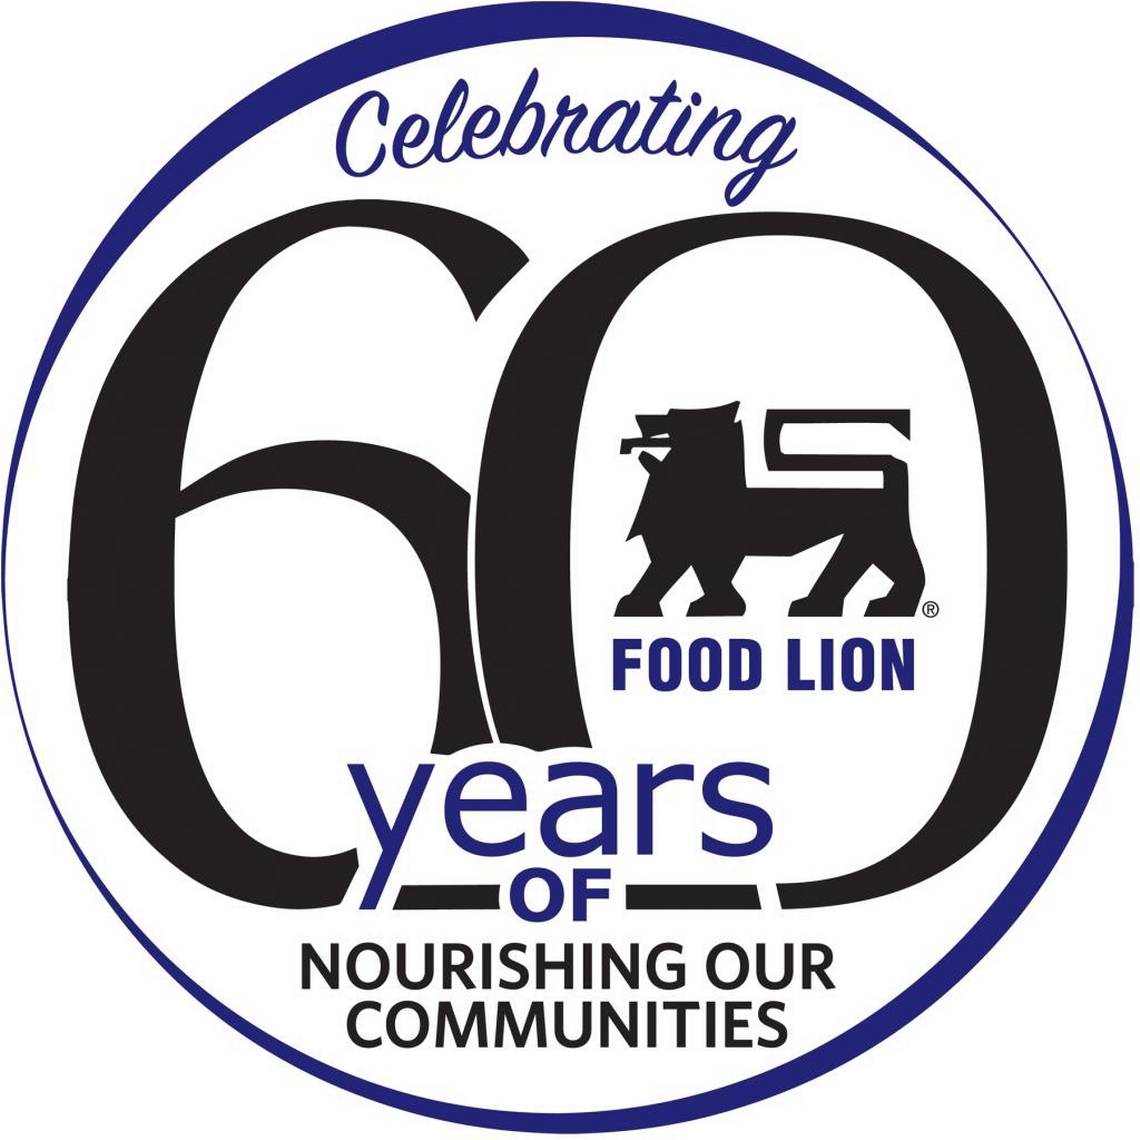 Food Lion Logo - Food Lion celebrates 60th anniversary with discounts, trivia